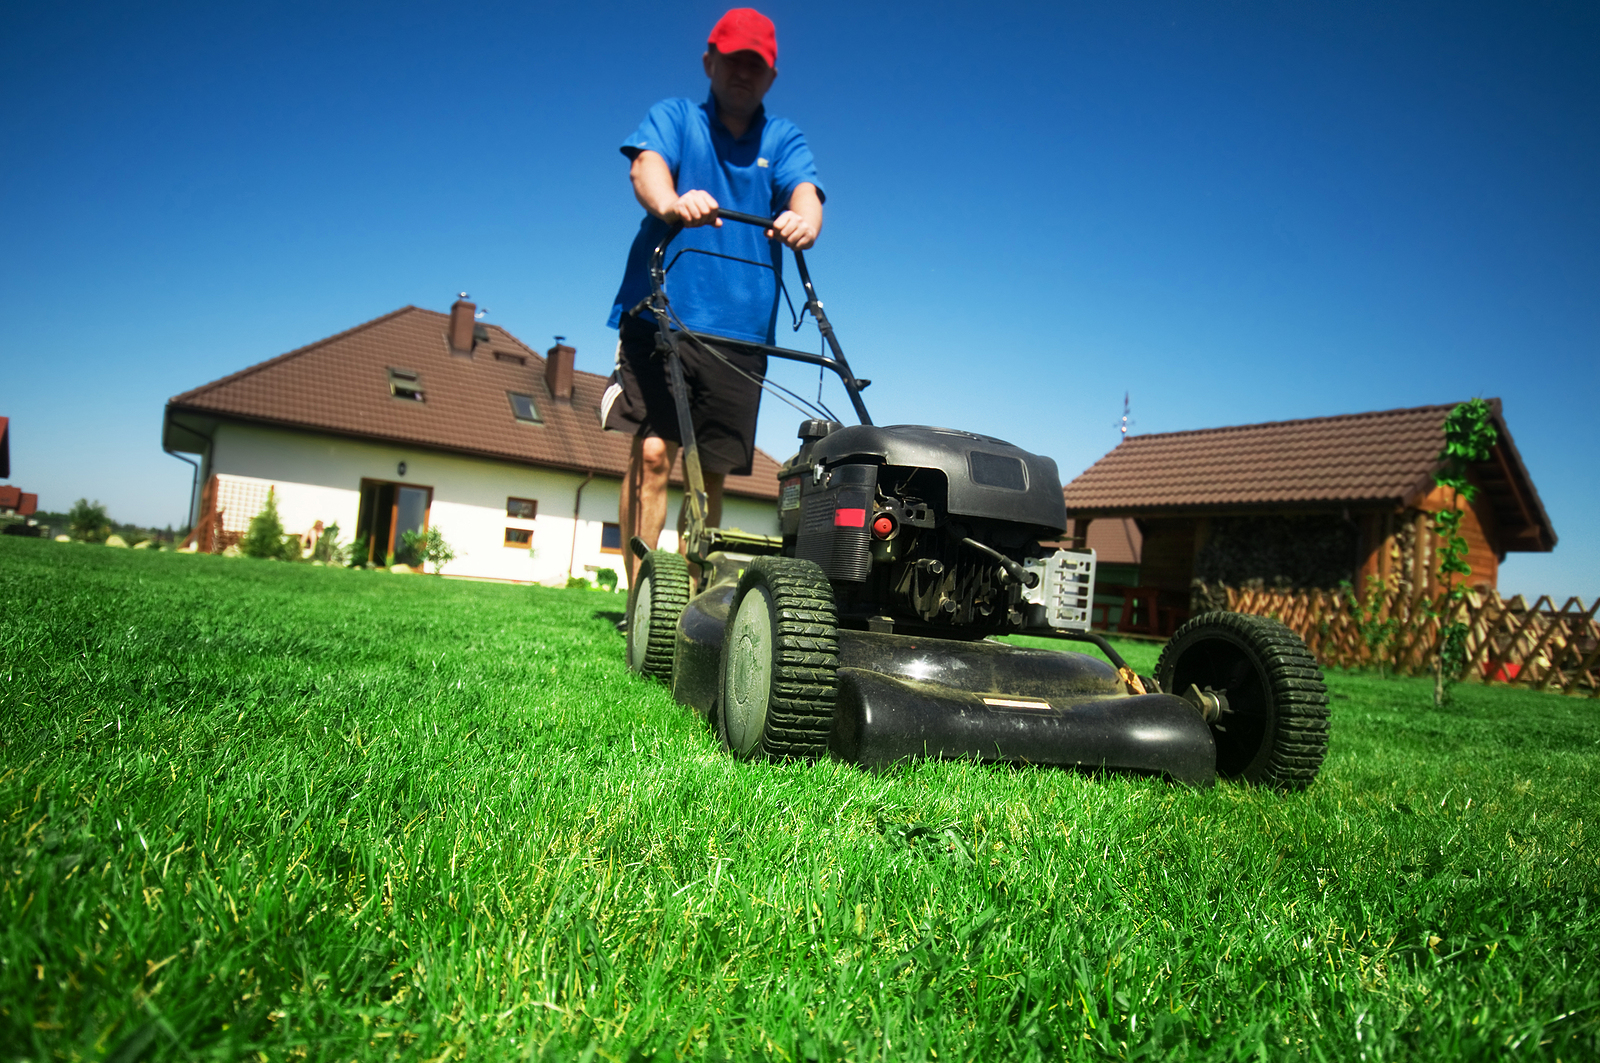 6 Tips for Marketing Your Commercial Lawn Care Company